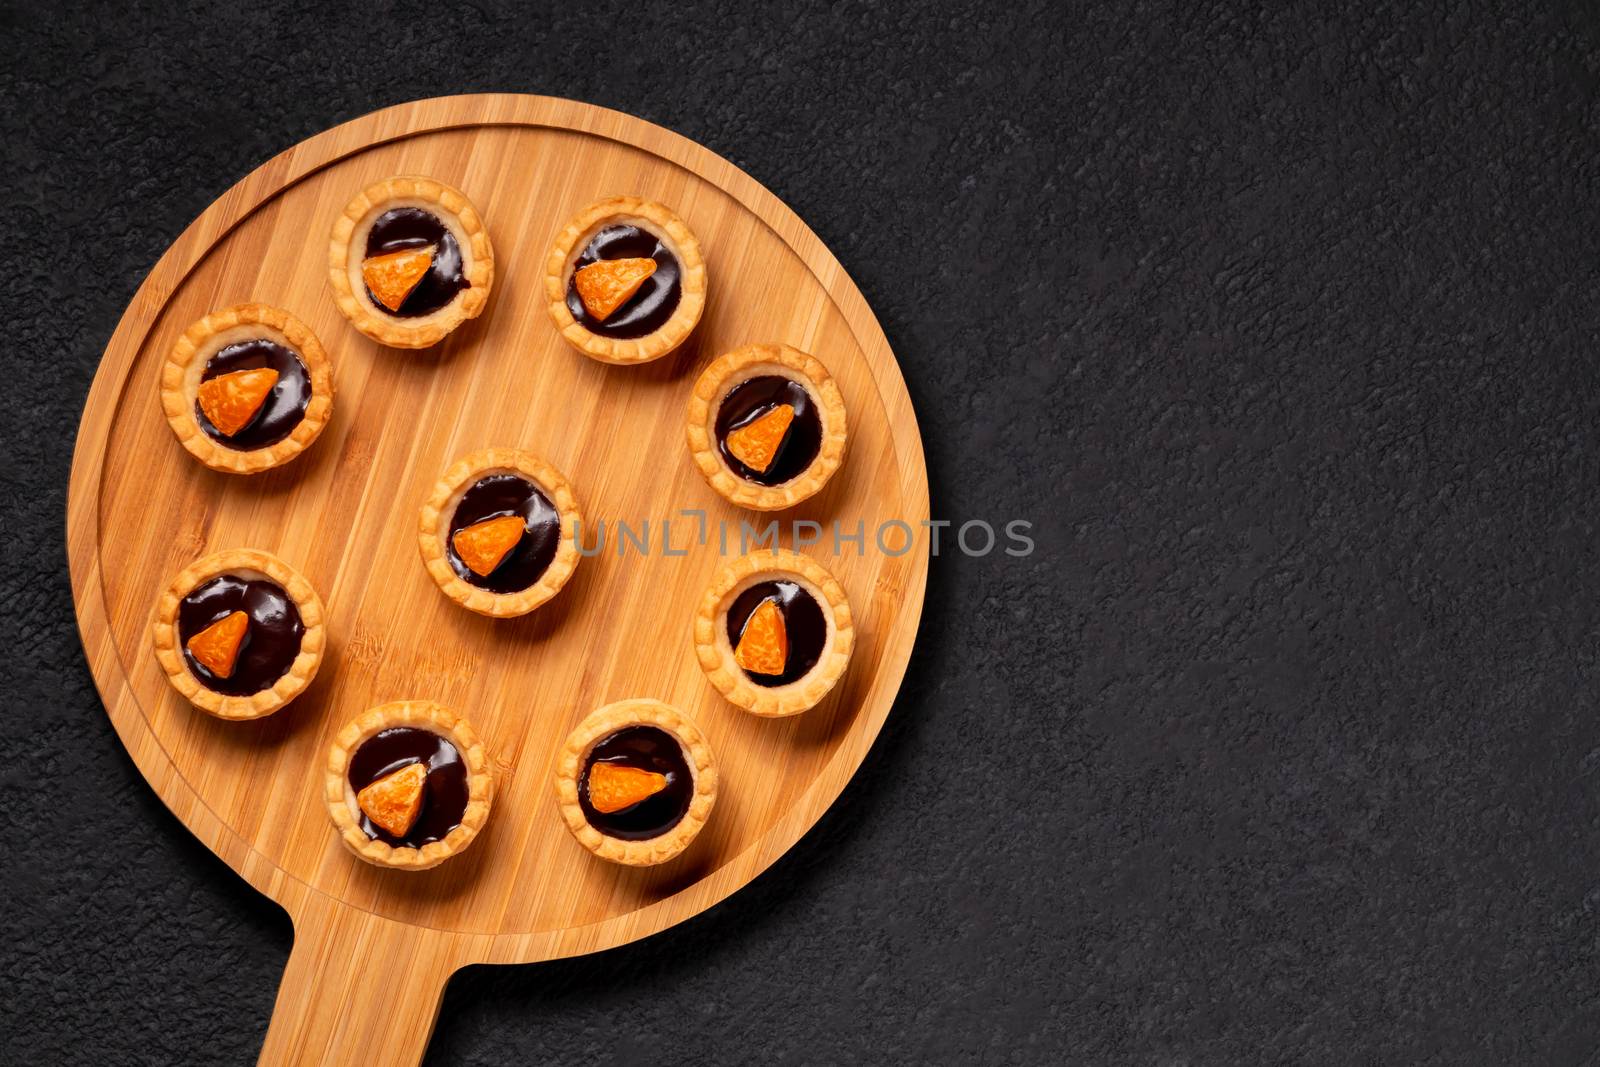 Sweet tartlets with chocolate and slices of tangerine on a wooden dish for serving, top view.